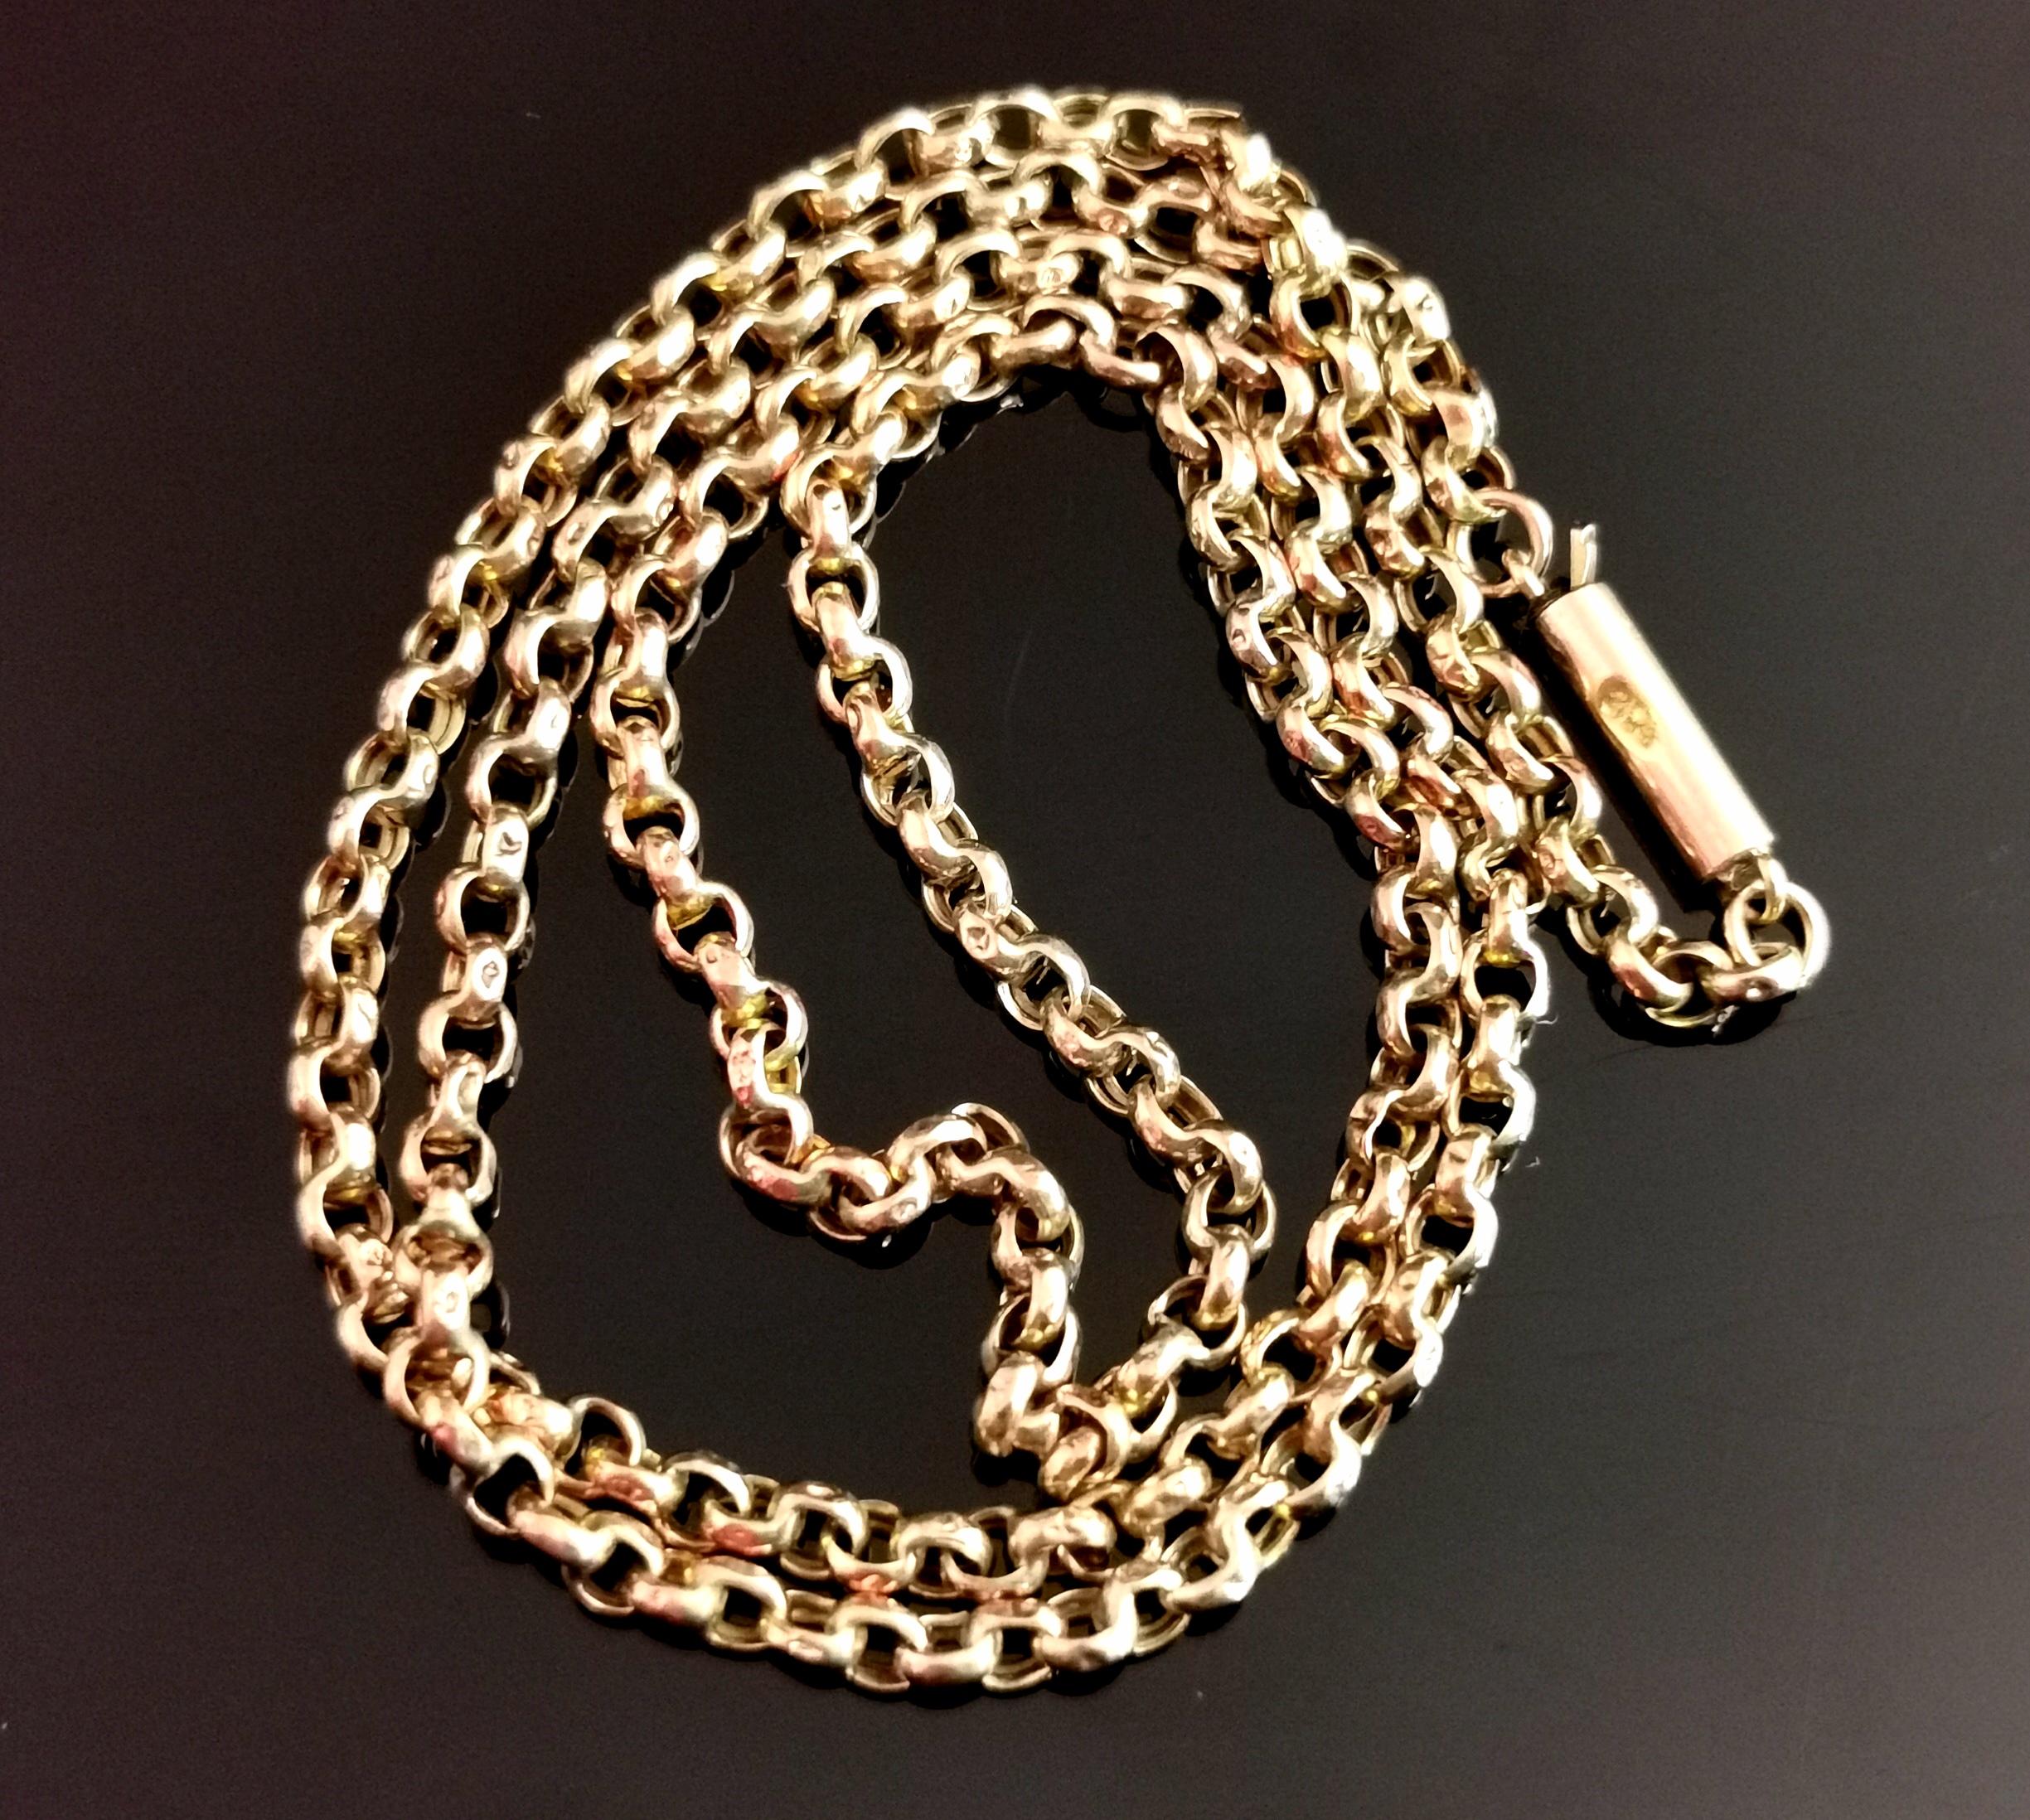 A gorgeous antique, Edwardian era 9kt yellow gold Belcher or rolo link chain necklace.

Attractive yellow gold oval shaped links with a barrel clasp.

A stunning chain, it is lightweight and easy to wear, perfect for a small pendant or locket.

This